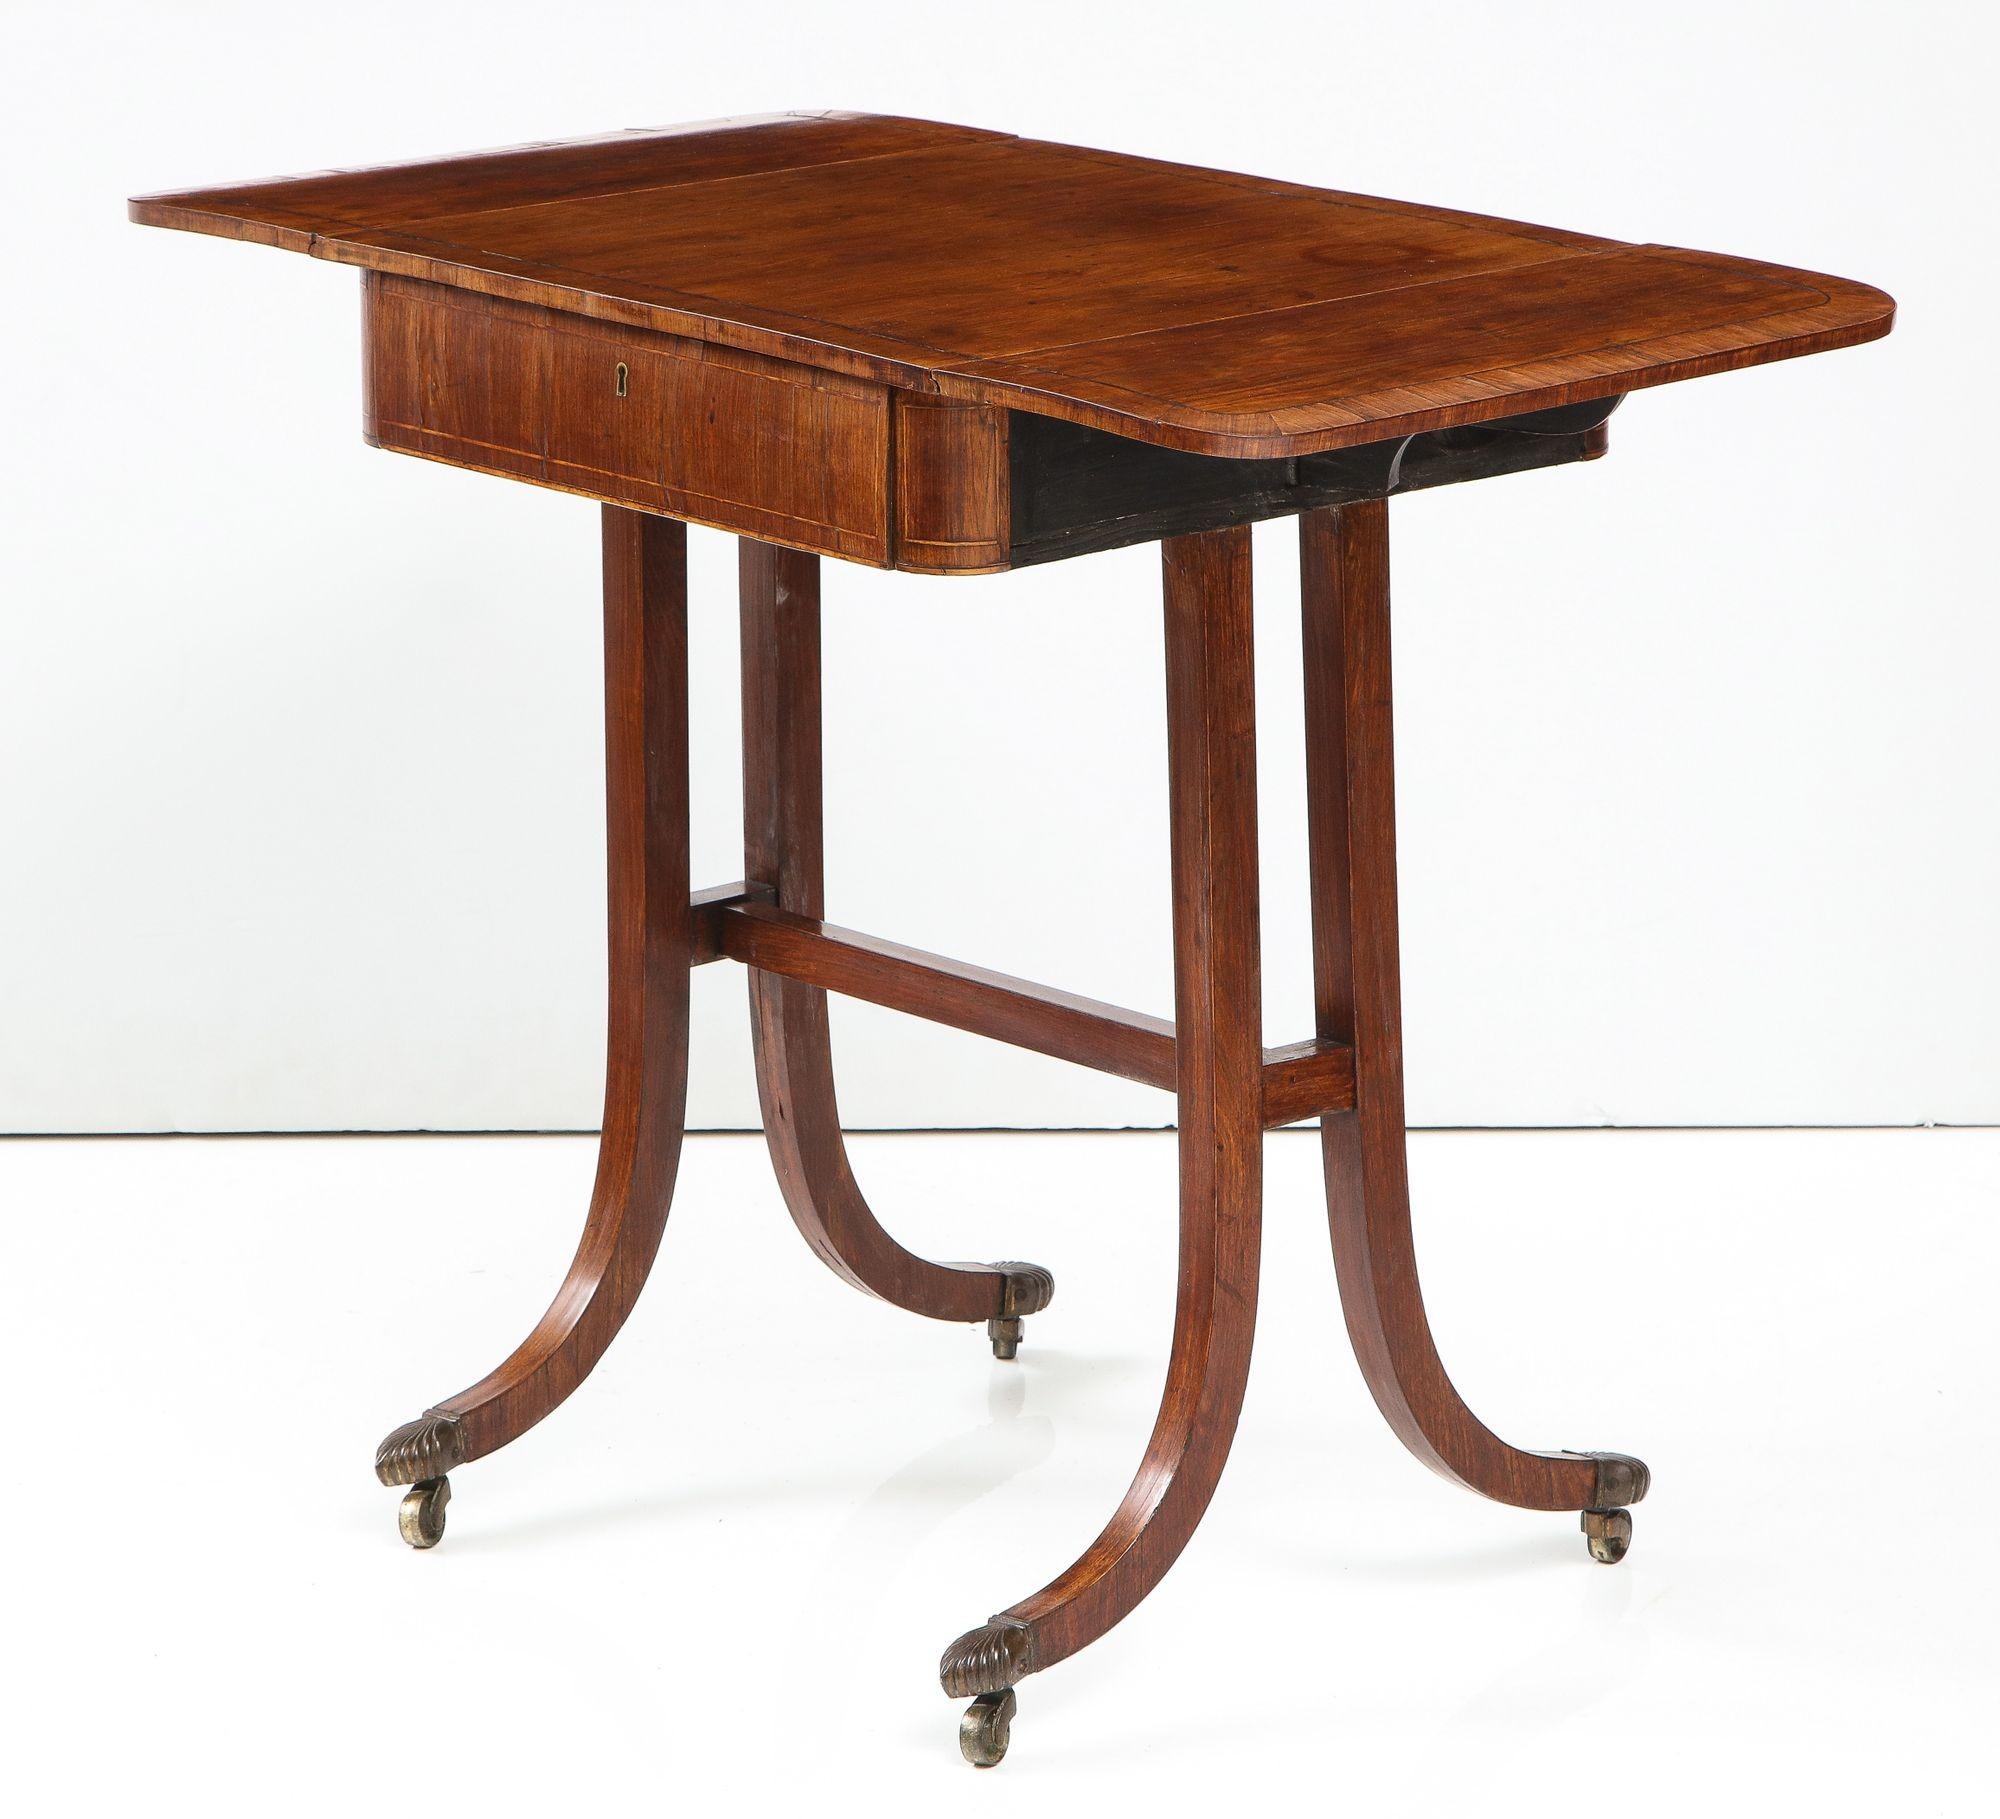 Rare, fine and diminutive cocuswood sofa table, ex collection of Doris Duke, the top with ebony string inlay and purpleheart cross banding, having two flap leaves and single drawer and standing on down-swept legs joined by 